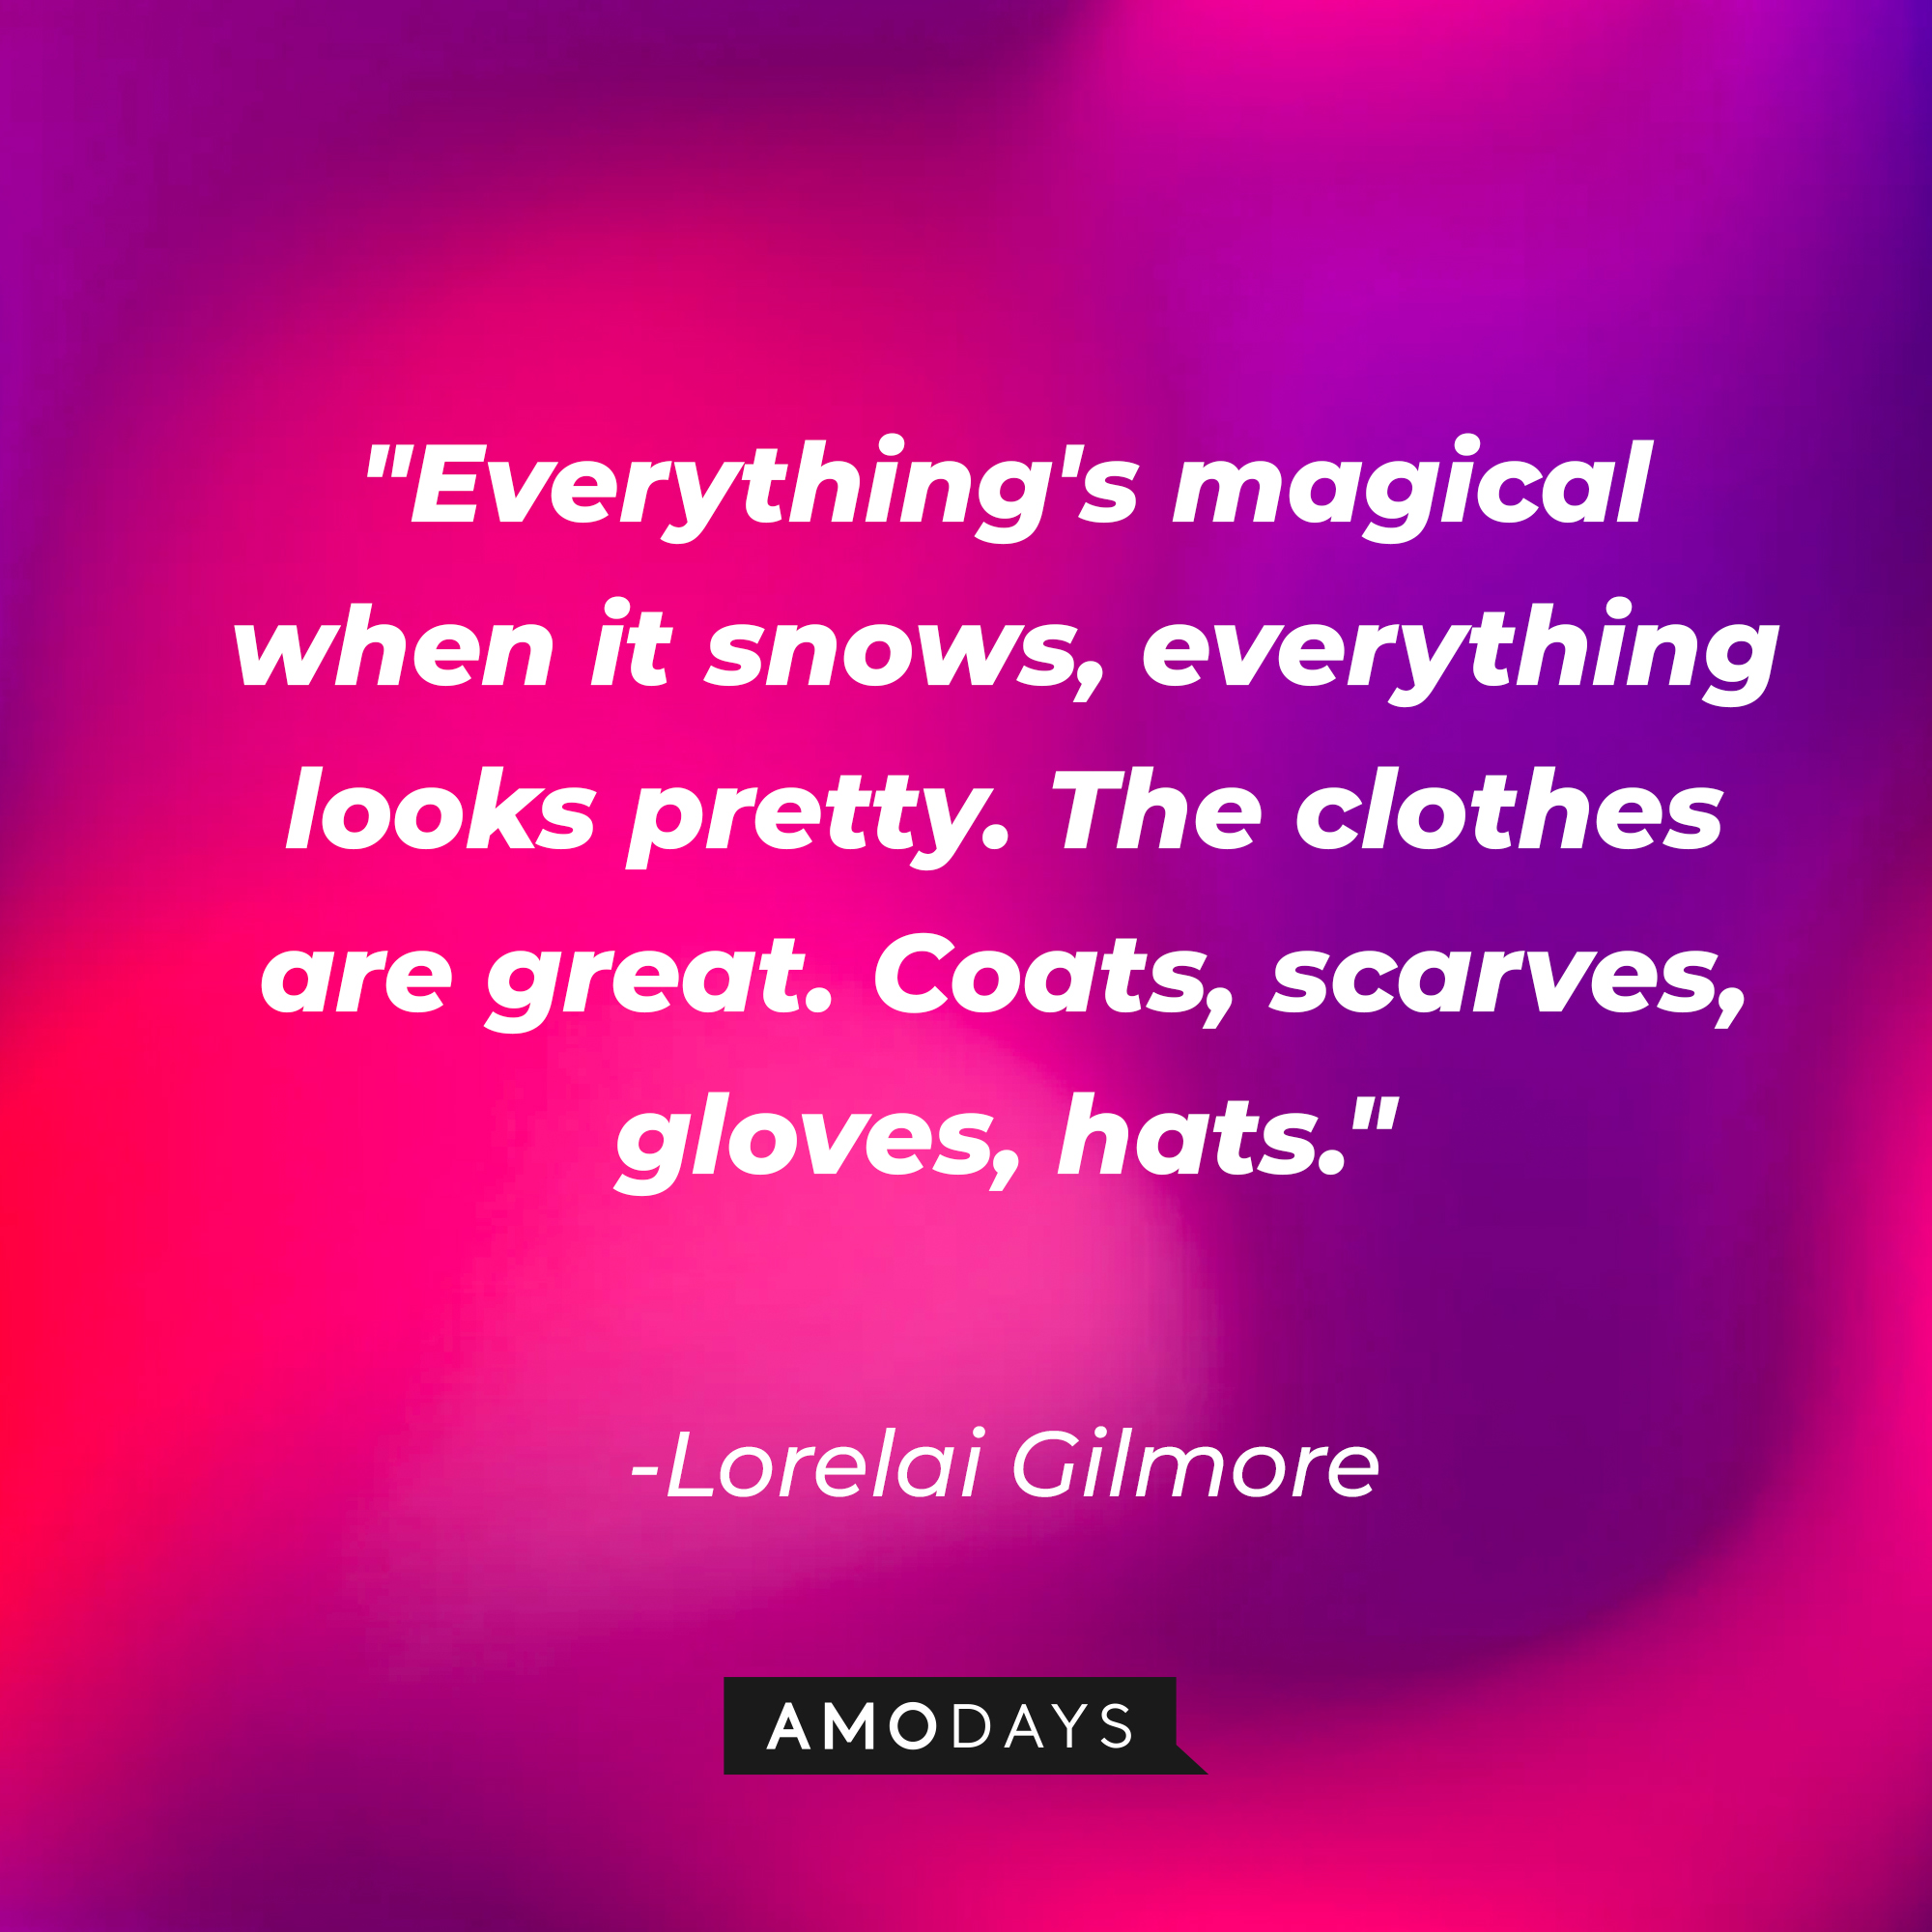 Lorelai Gilmore's quote: "Everything's magical when it snows, everything looks pretty. The clothes are great. Coats, scarves, gloves, hats." | Source: AmoDays